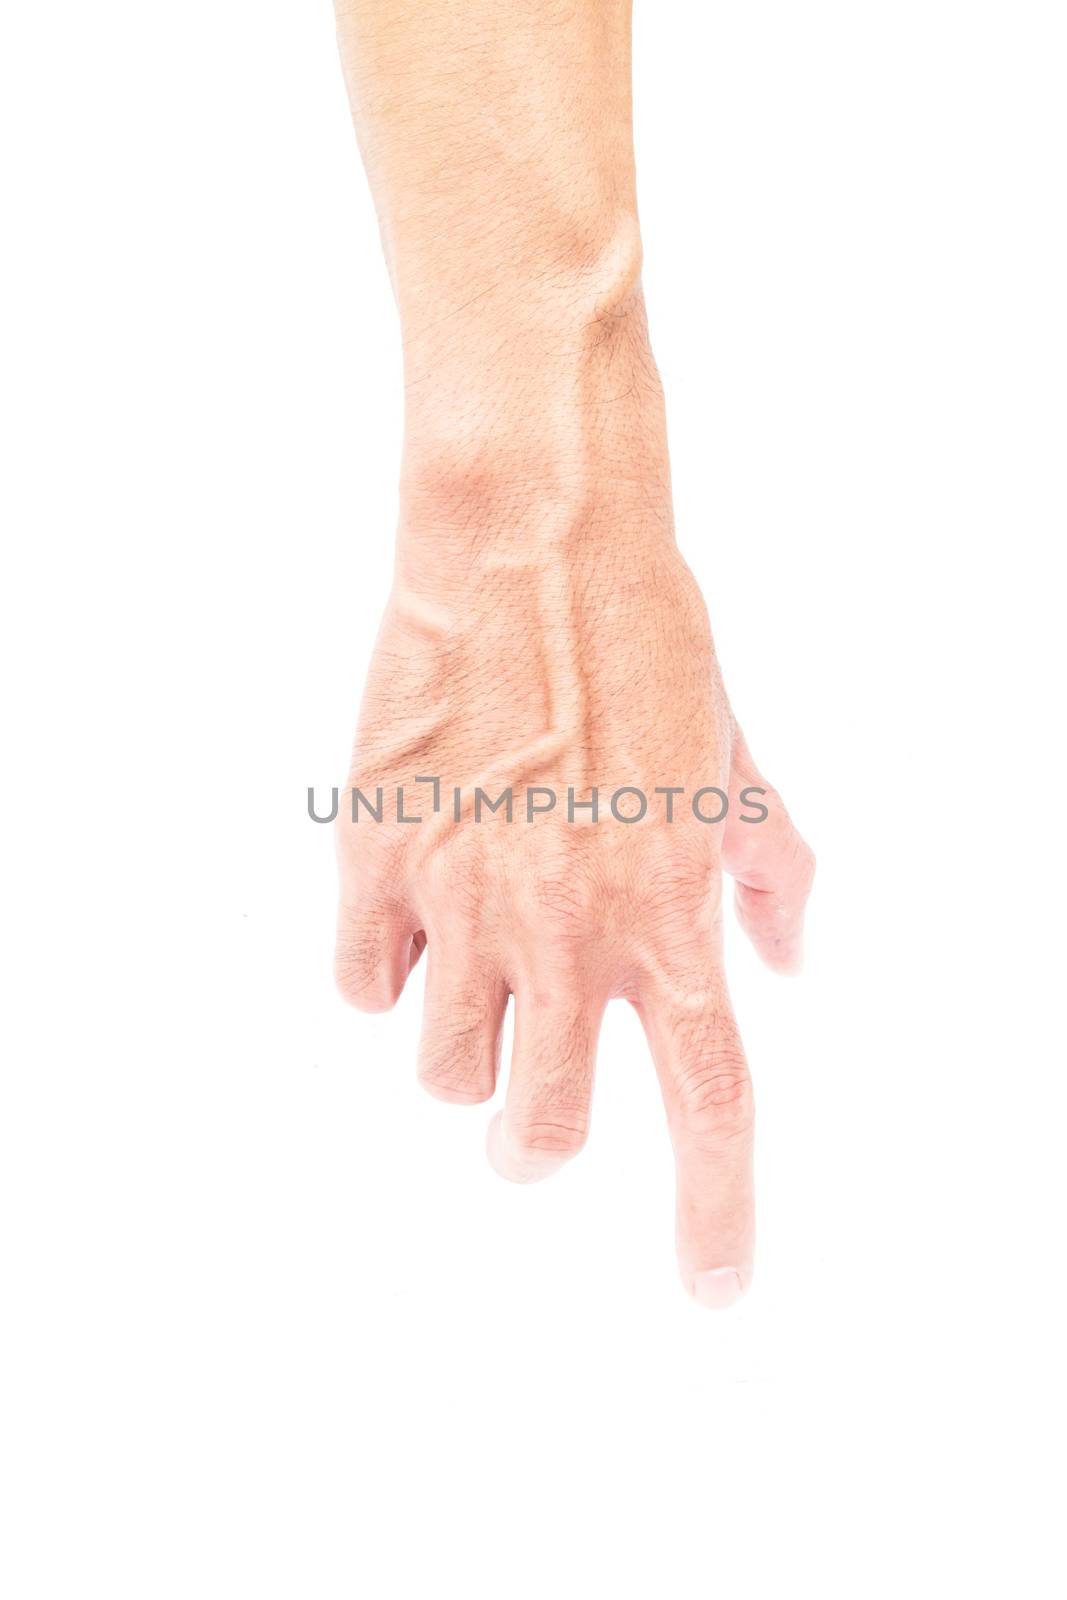 Man arm with blood veins on white background, health care concept